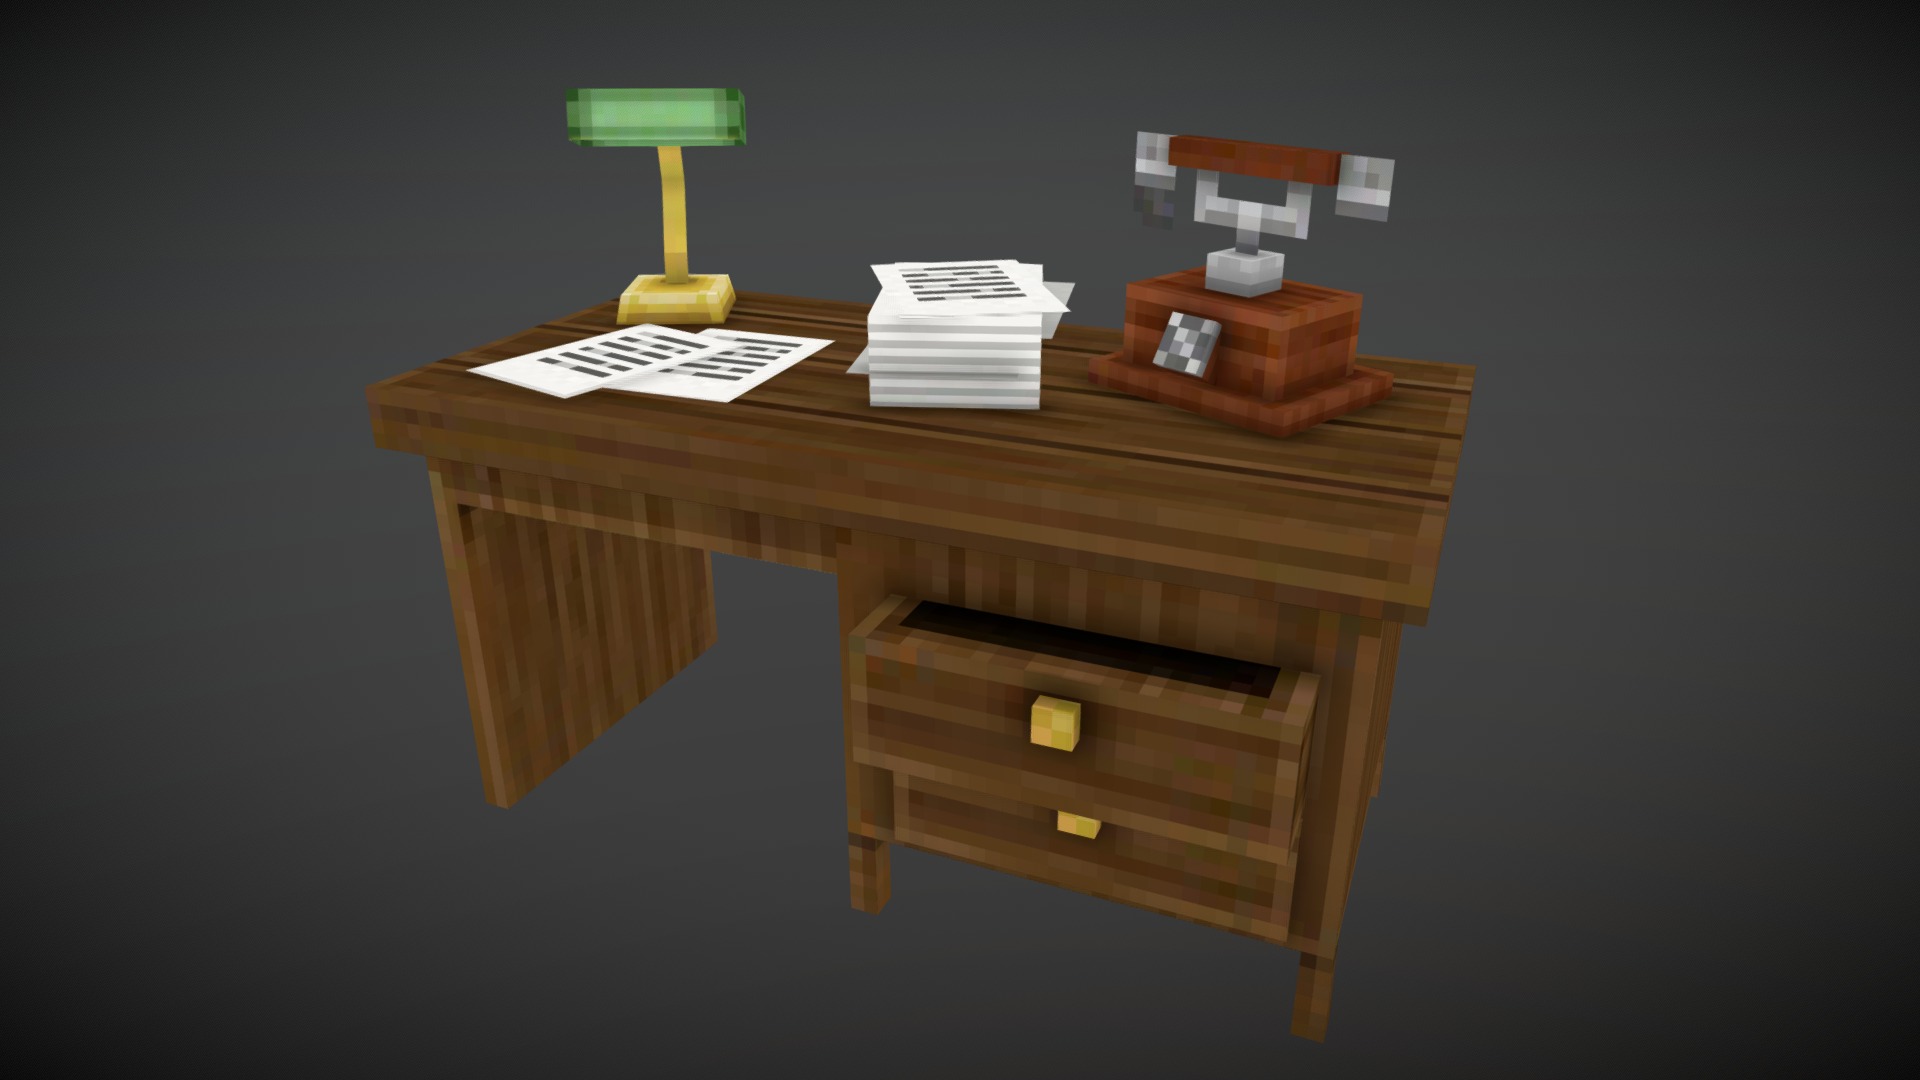 3D model Wooden pixel desk - This is a 3D model of the Wooden pixel desk. The 3D model is about a wooden desk with a lamp and books on it.